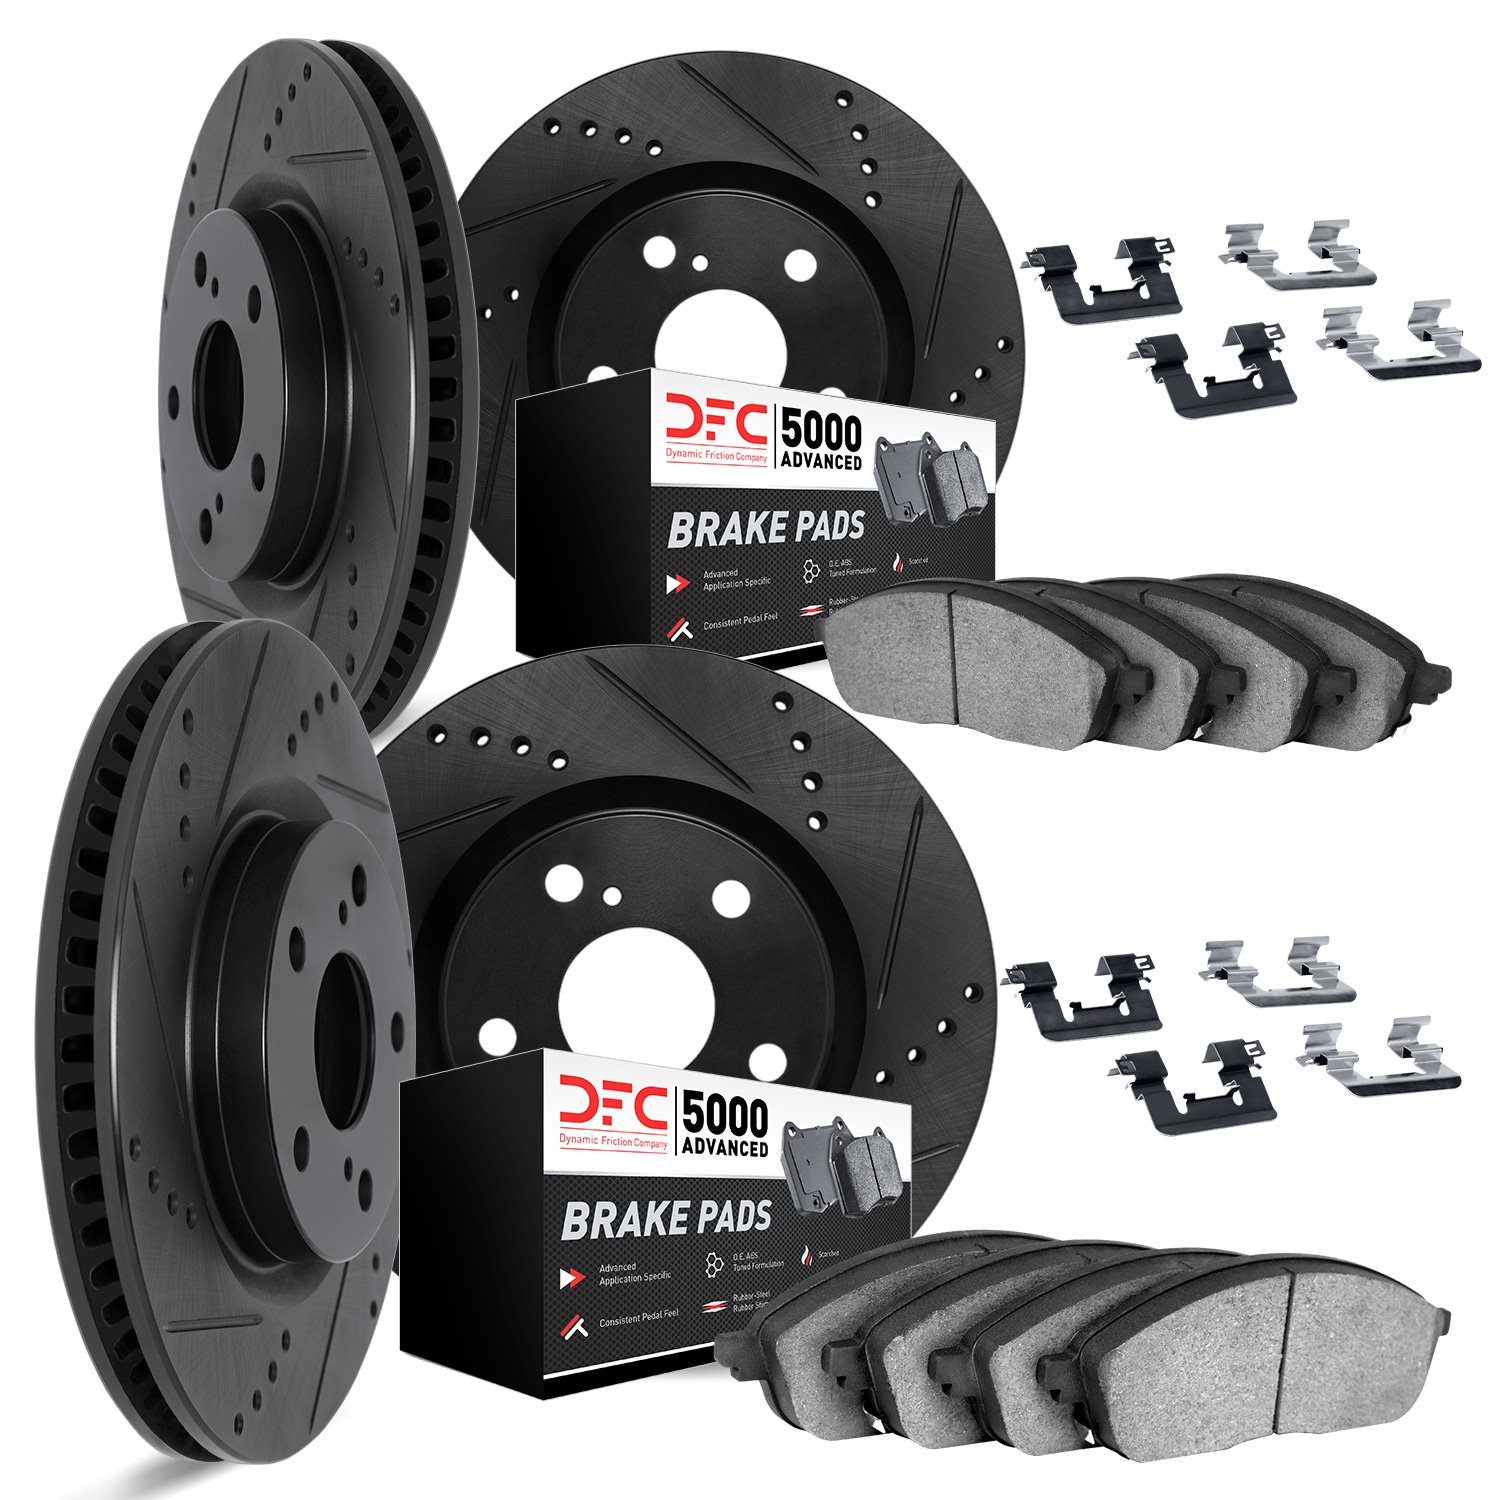 8514-31045 Drilled/Slotted Brake Rotors w/5000 Advanced Brake Pads Kit & Hardware [Black], 2012-2016 BMW, Position: Front and Re